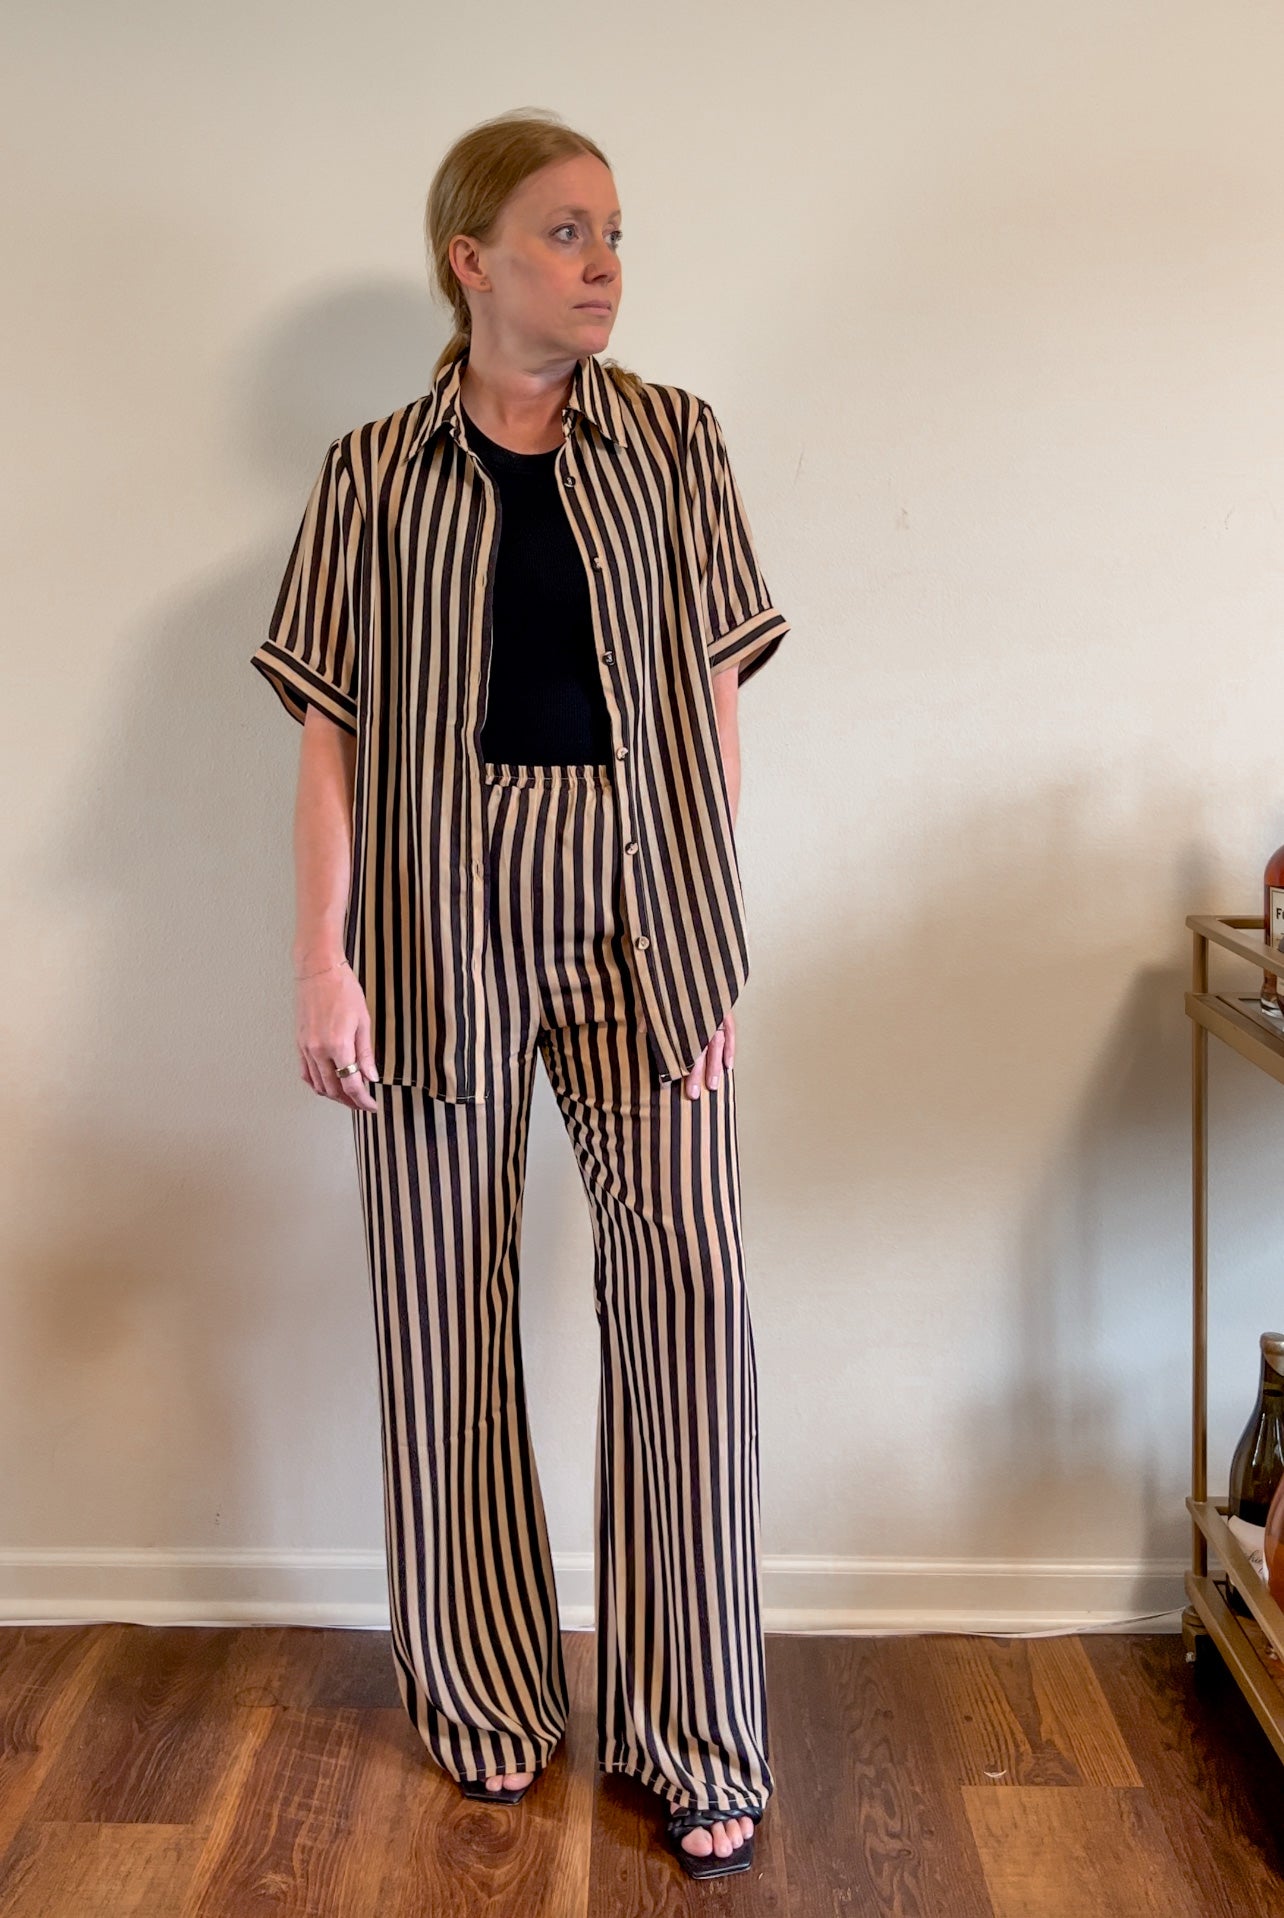 Black and Ivory Stripped Pants